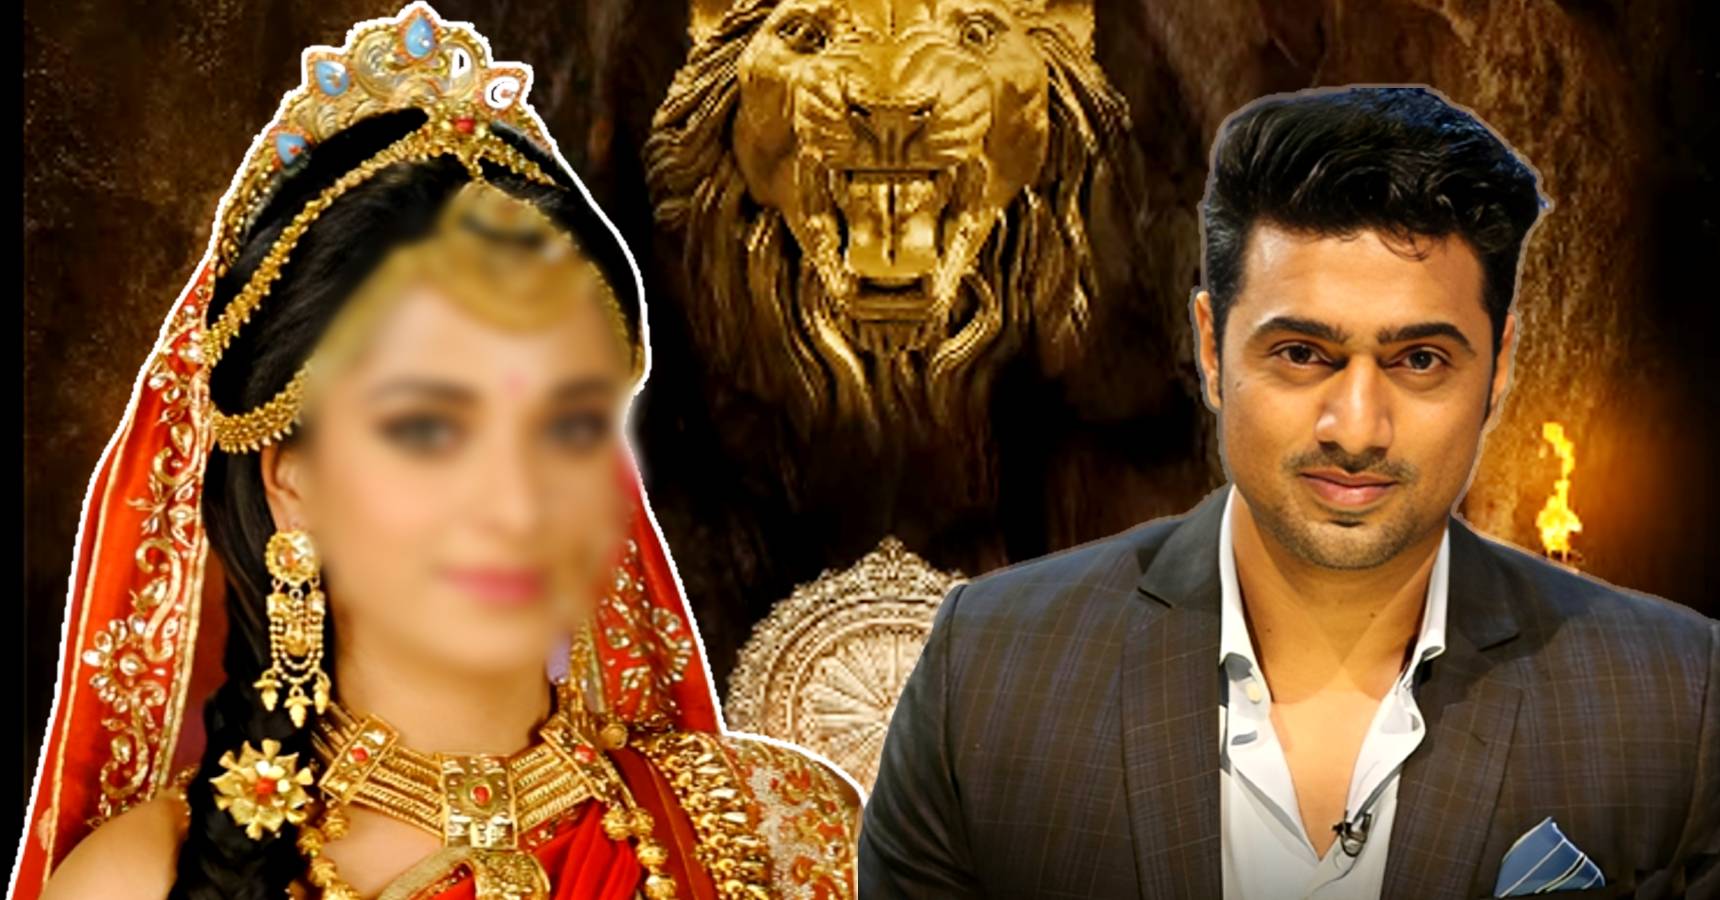 Tollywood actor Dev shared the first look of upcoming movie Draupadi